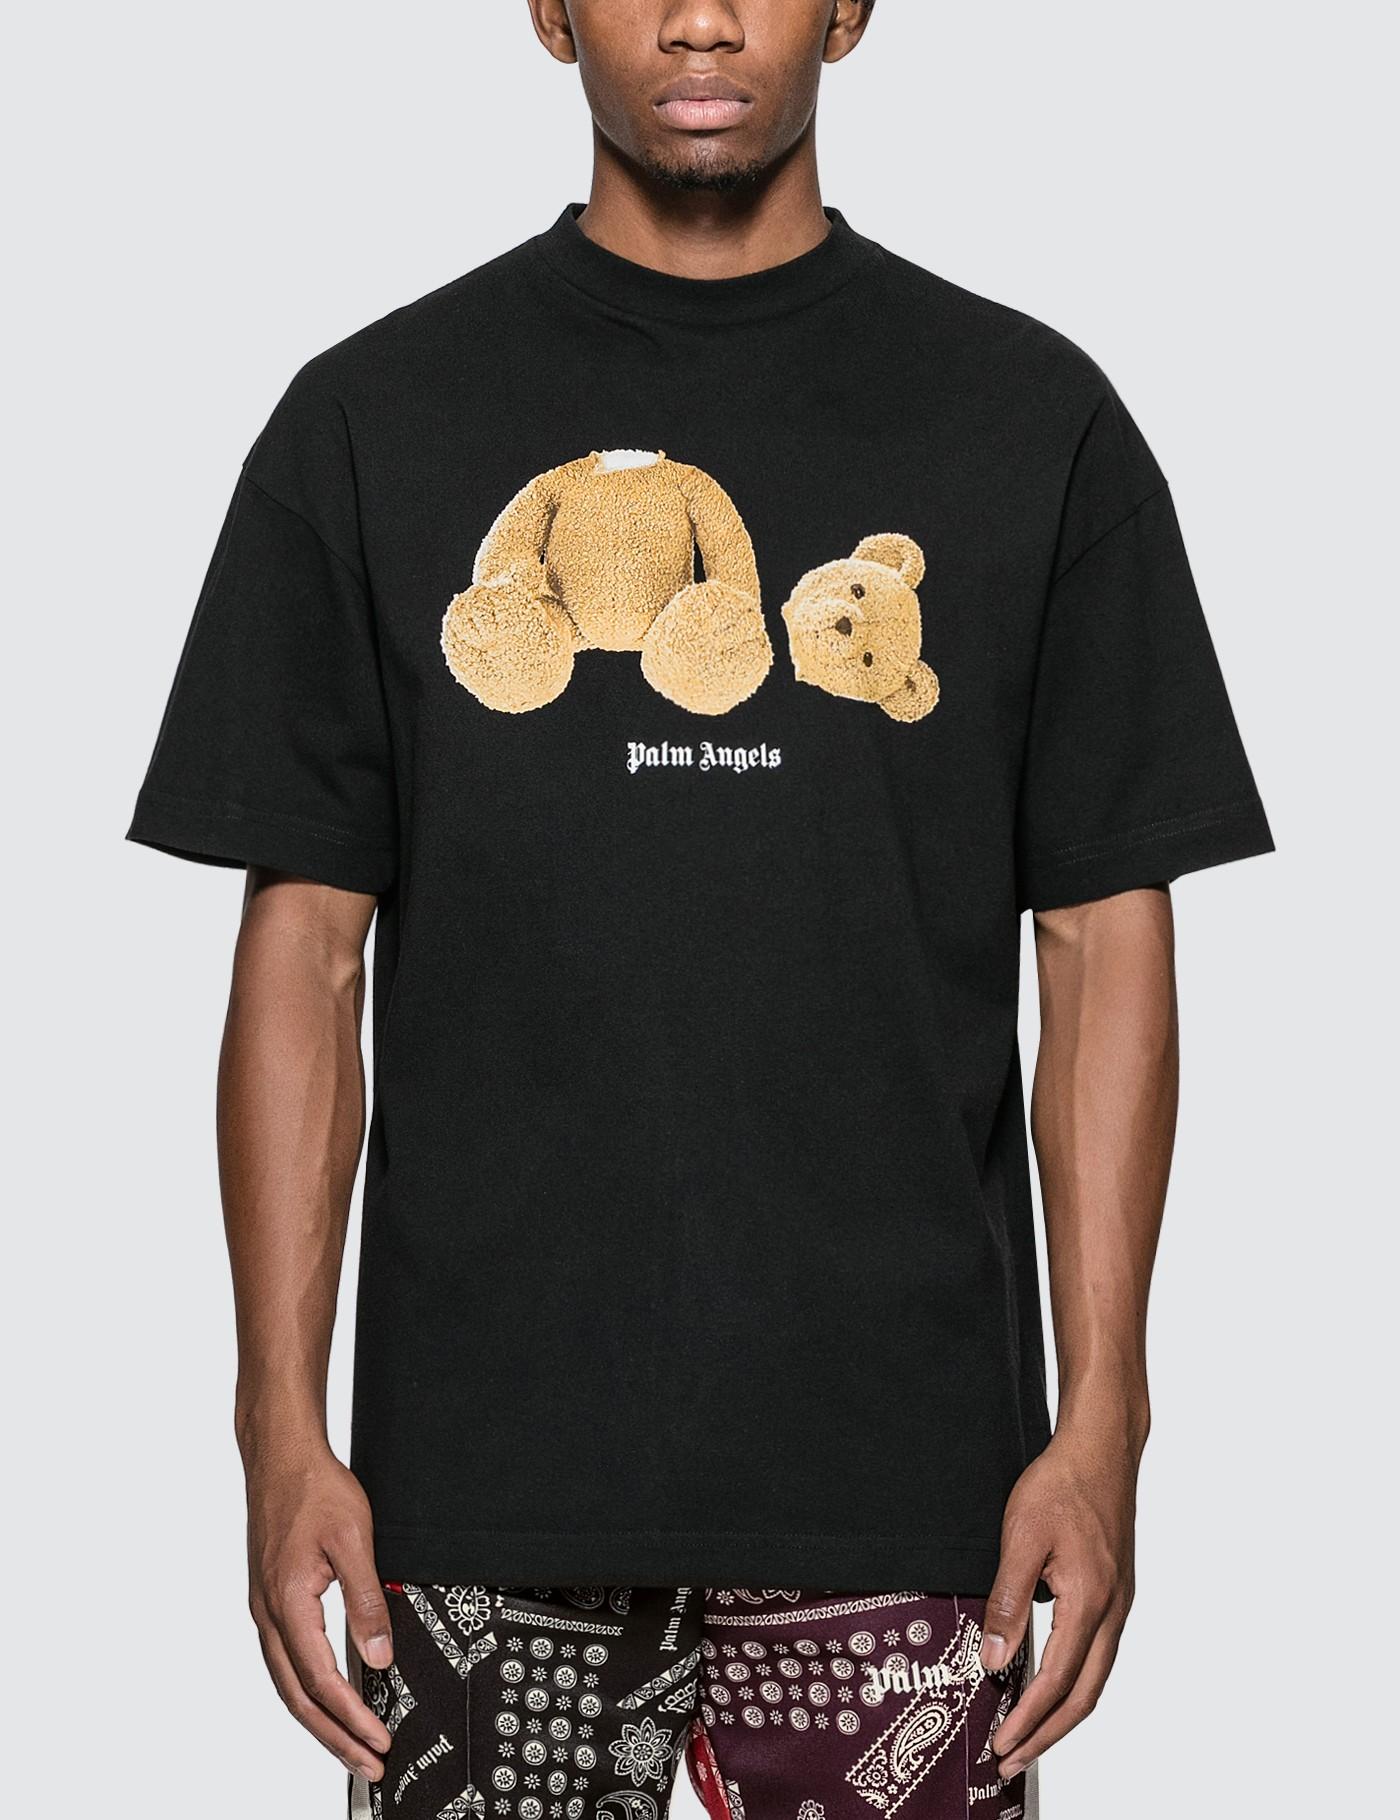 Palm Angels Kill The Bear T-shirt in Black for Men - Lyst